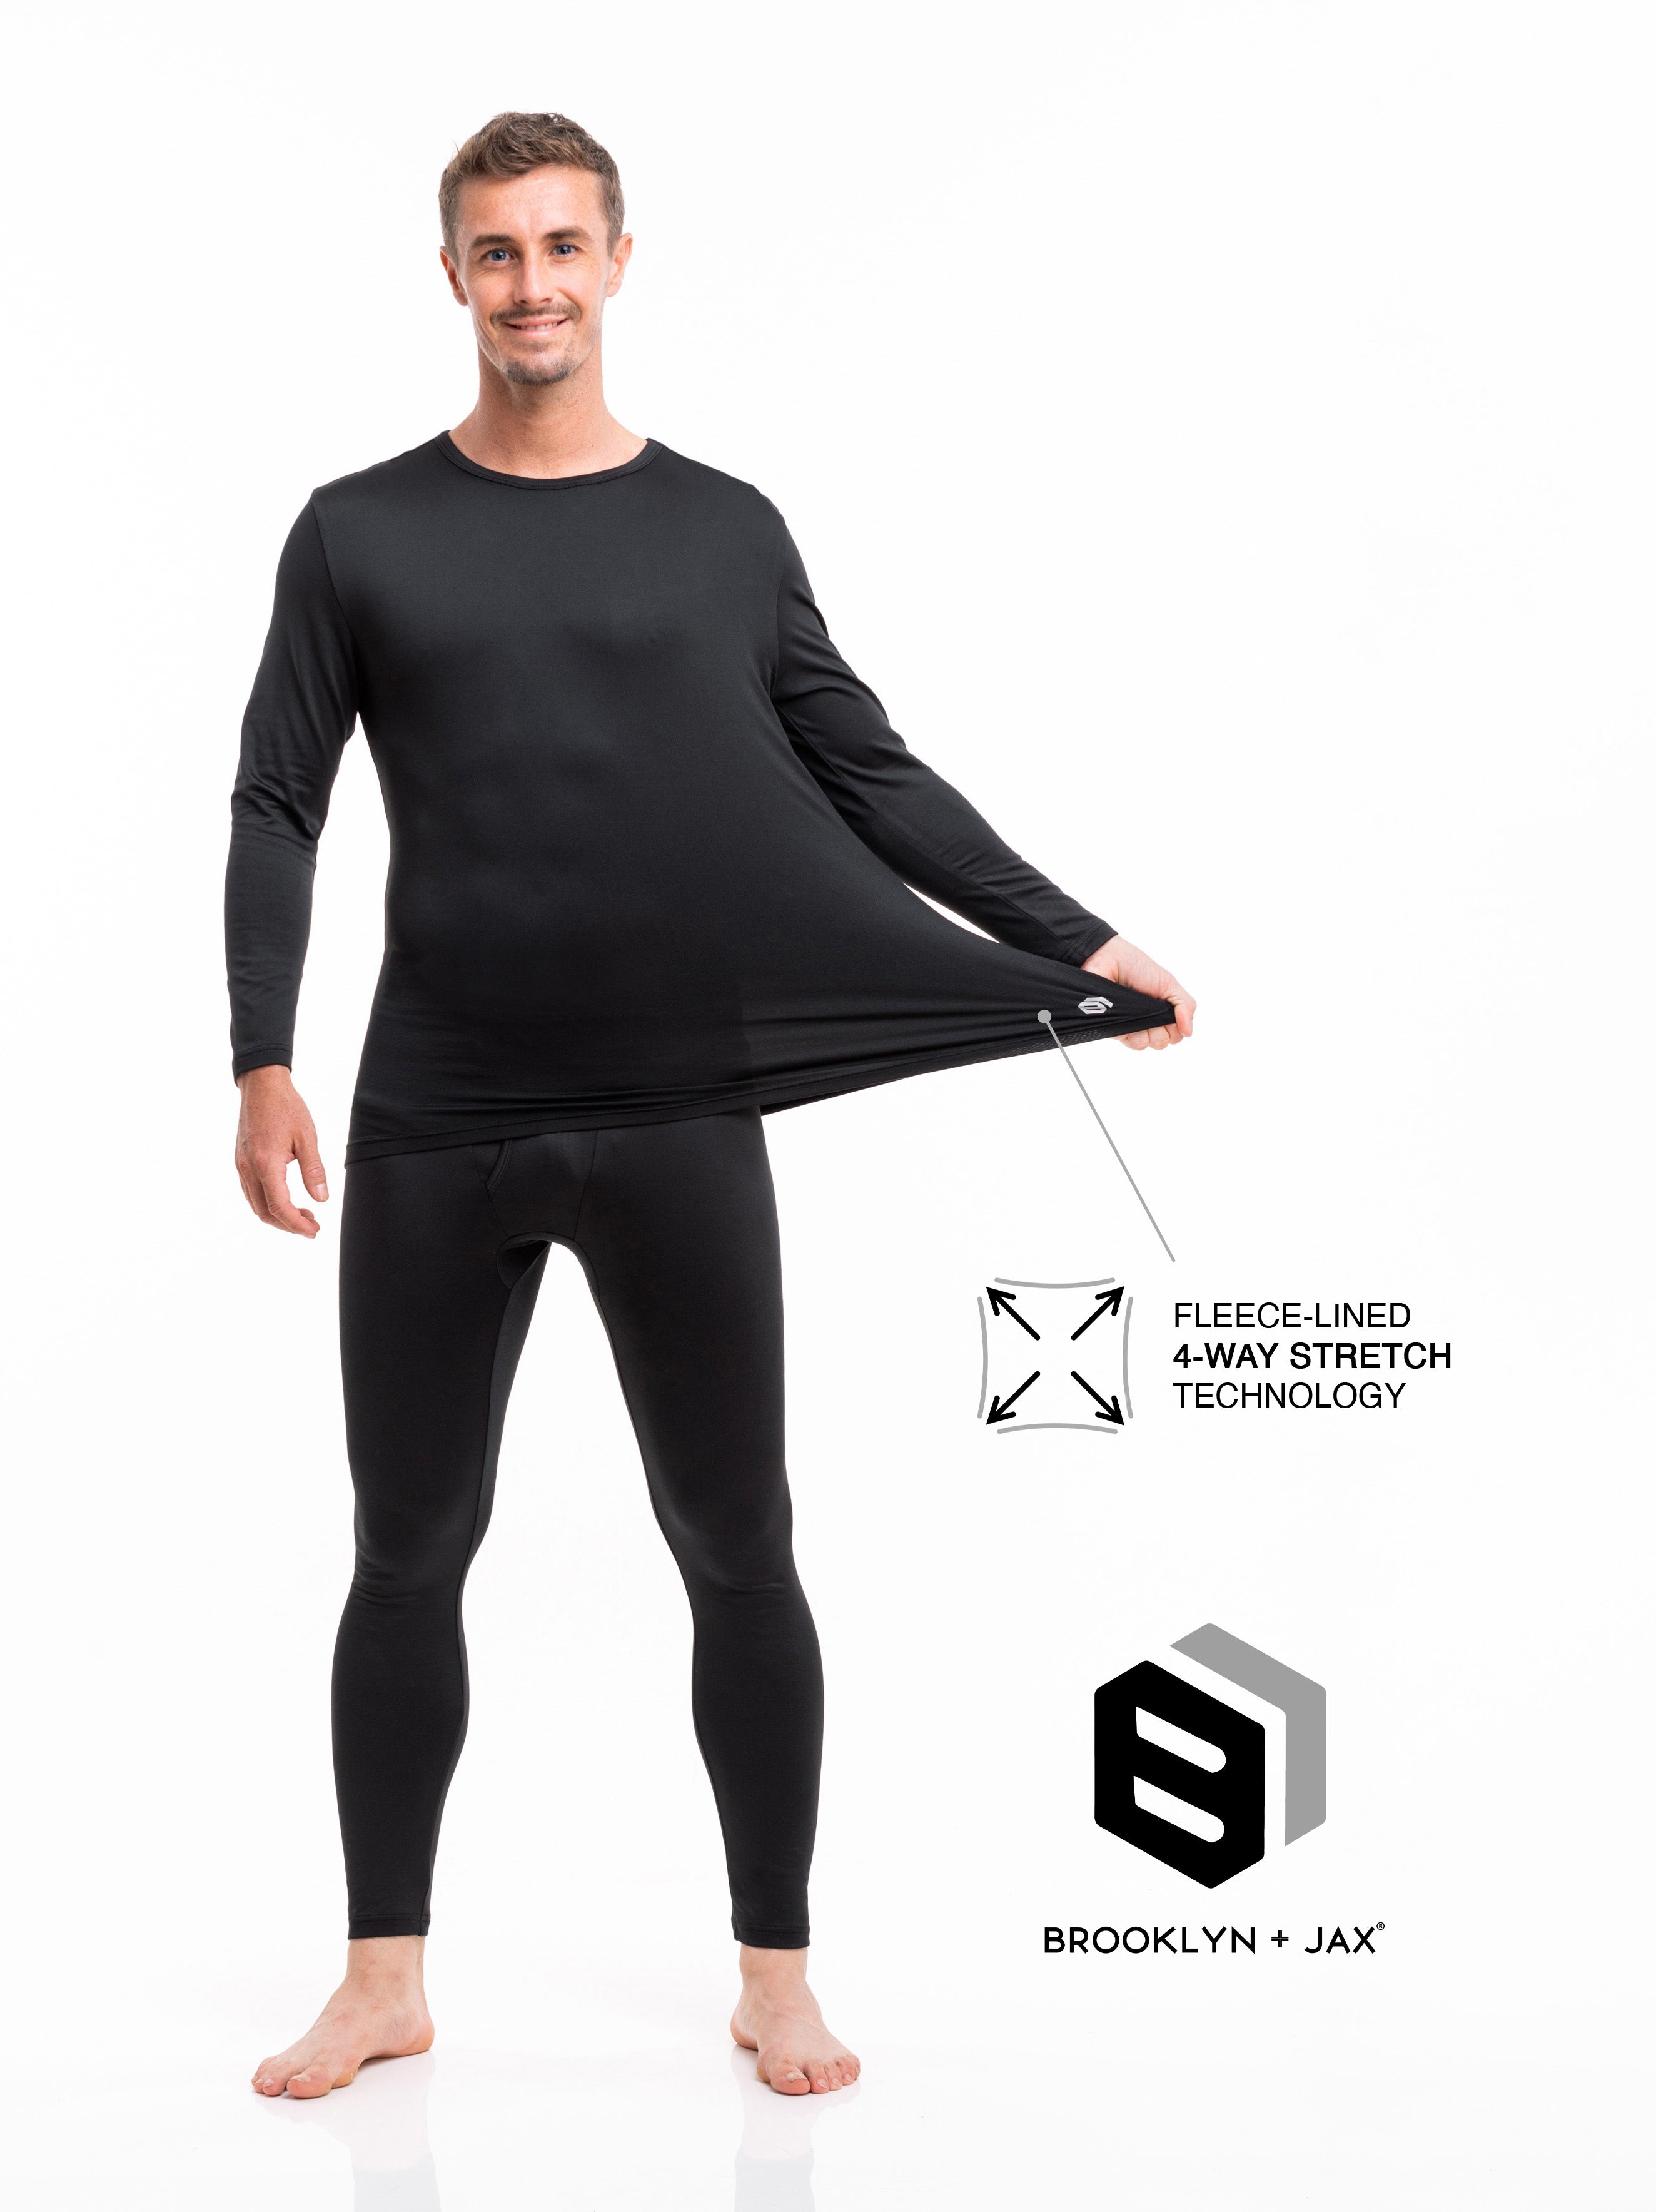 Dralon Seamless Fever Large Size Thermal Underwear for Men and